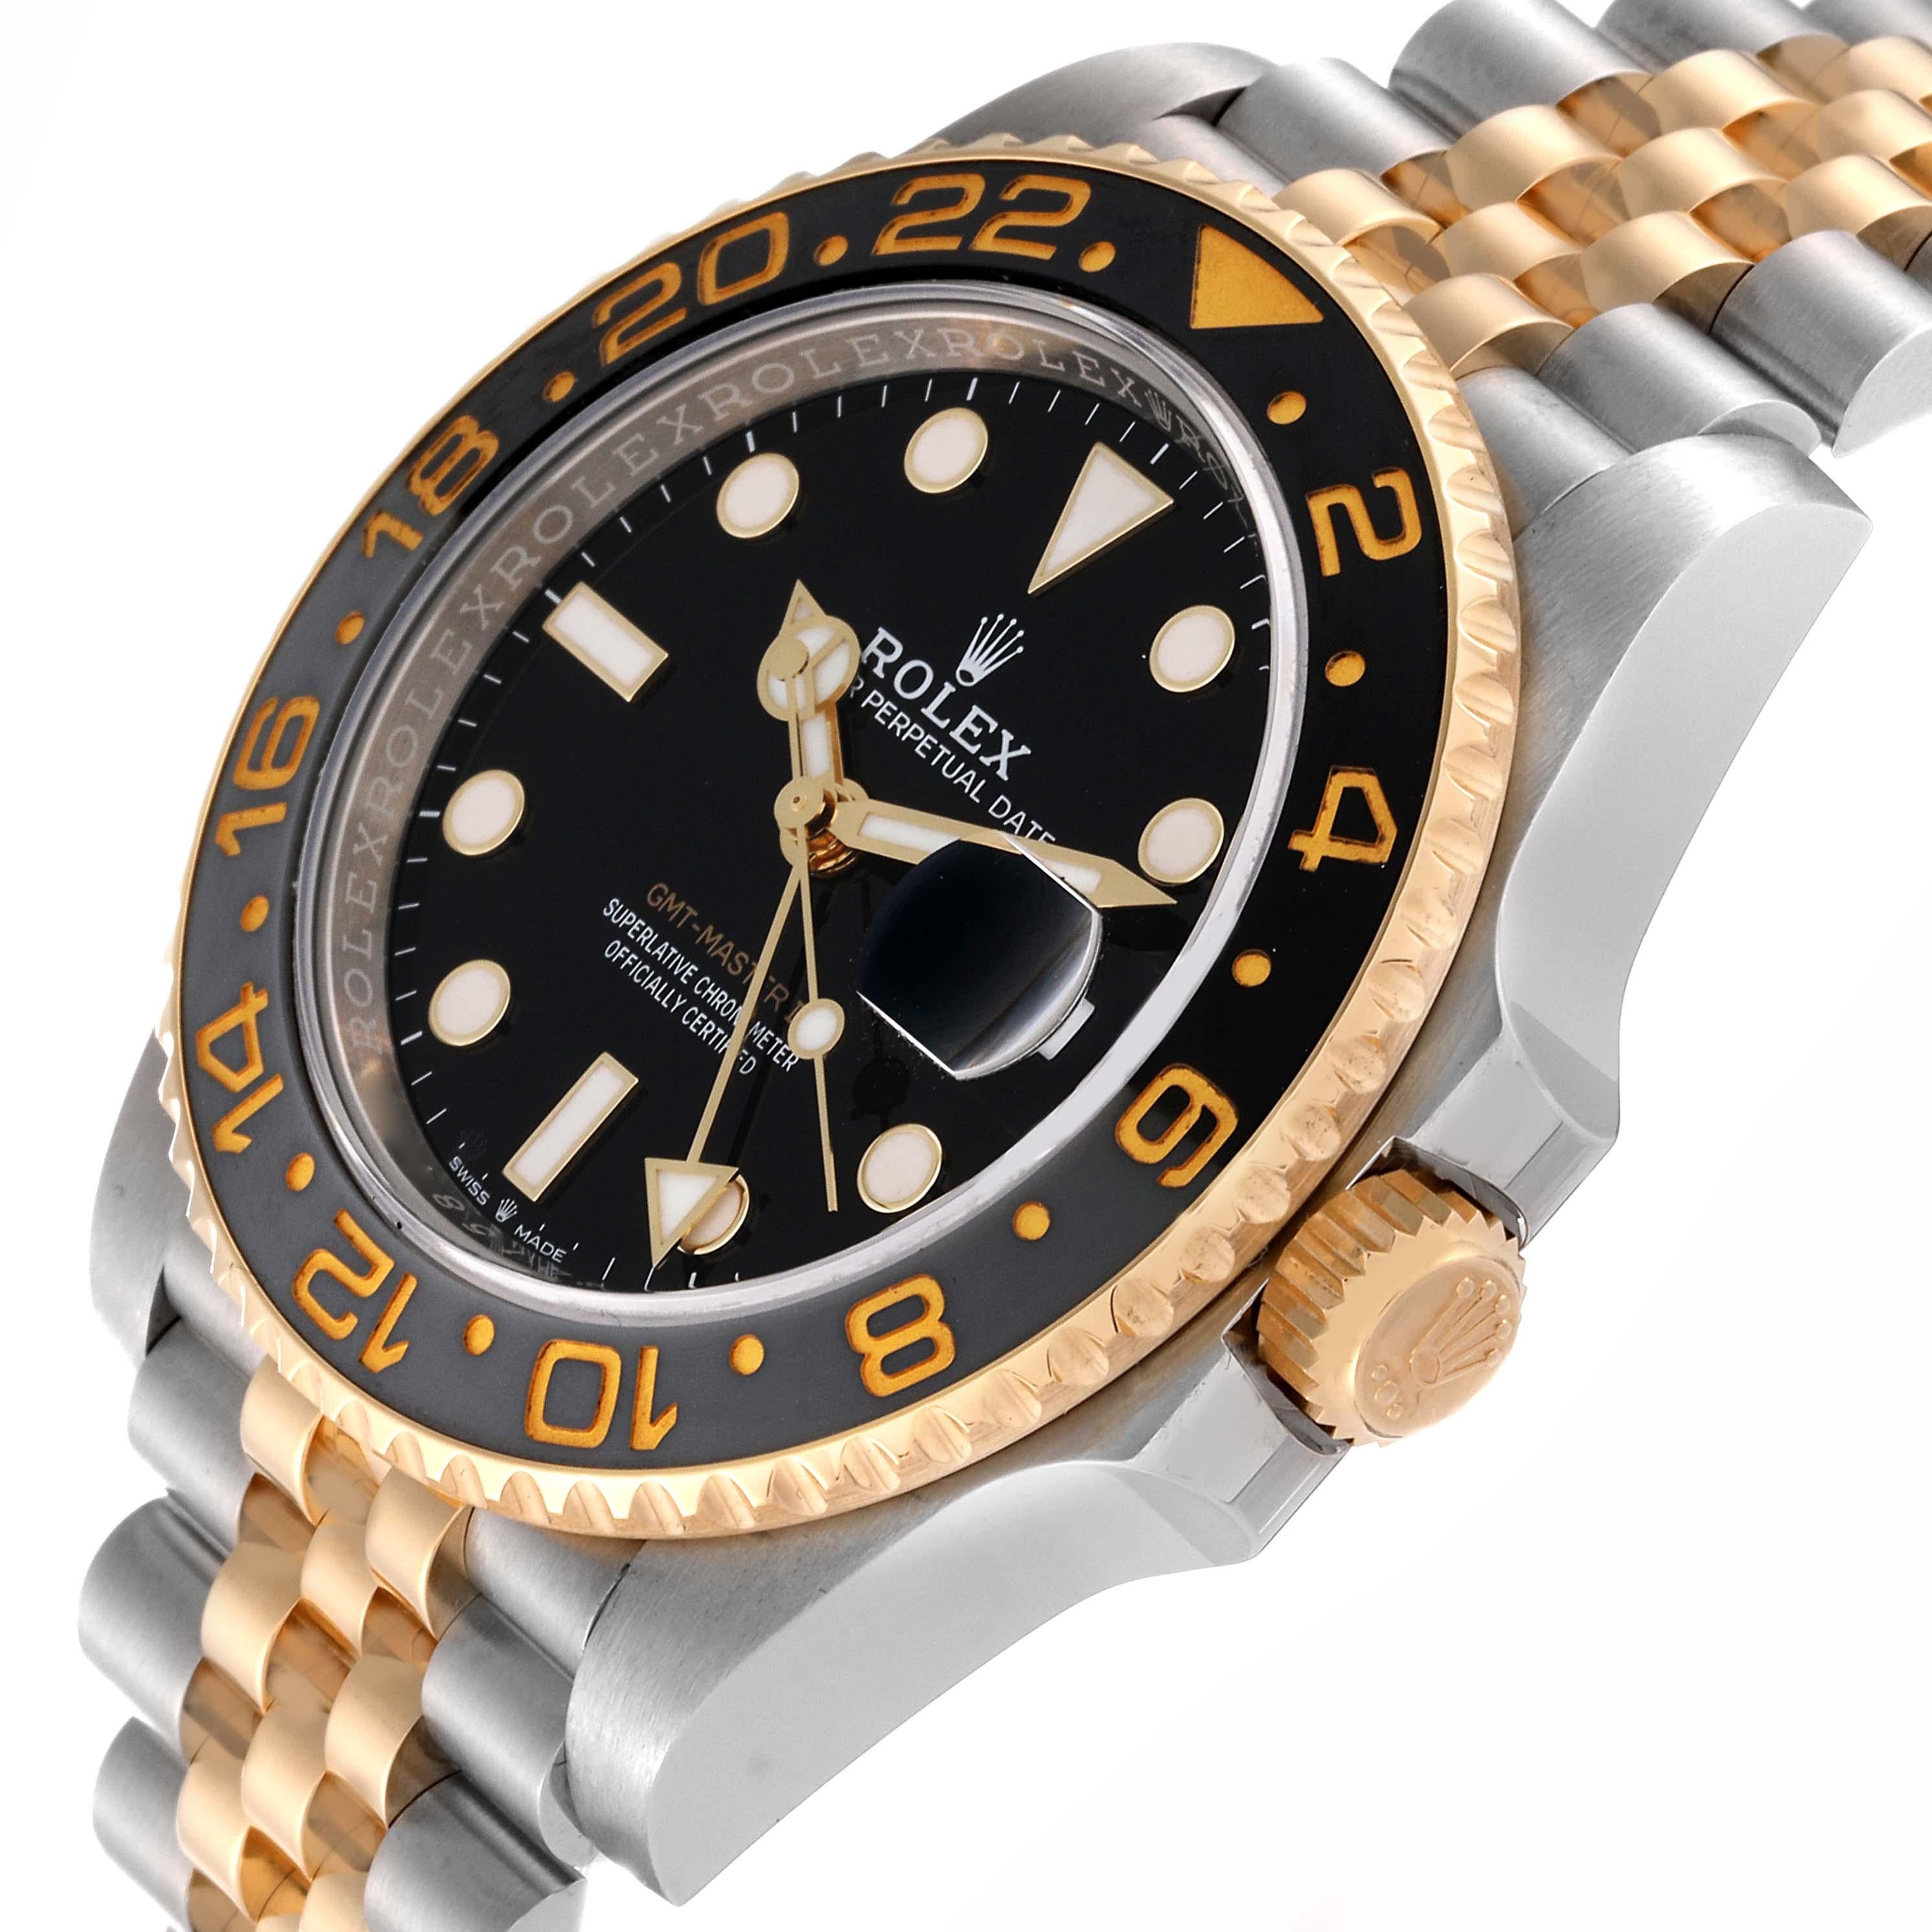 Rolex GMT Master II Yellow Gold Steel Grey Bezel Mens Watch 126713 Box Card In Excellent Condition For Sale In Atlanta, GA